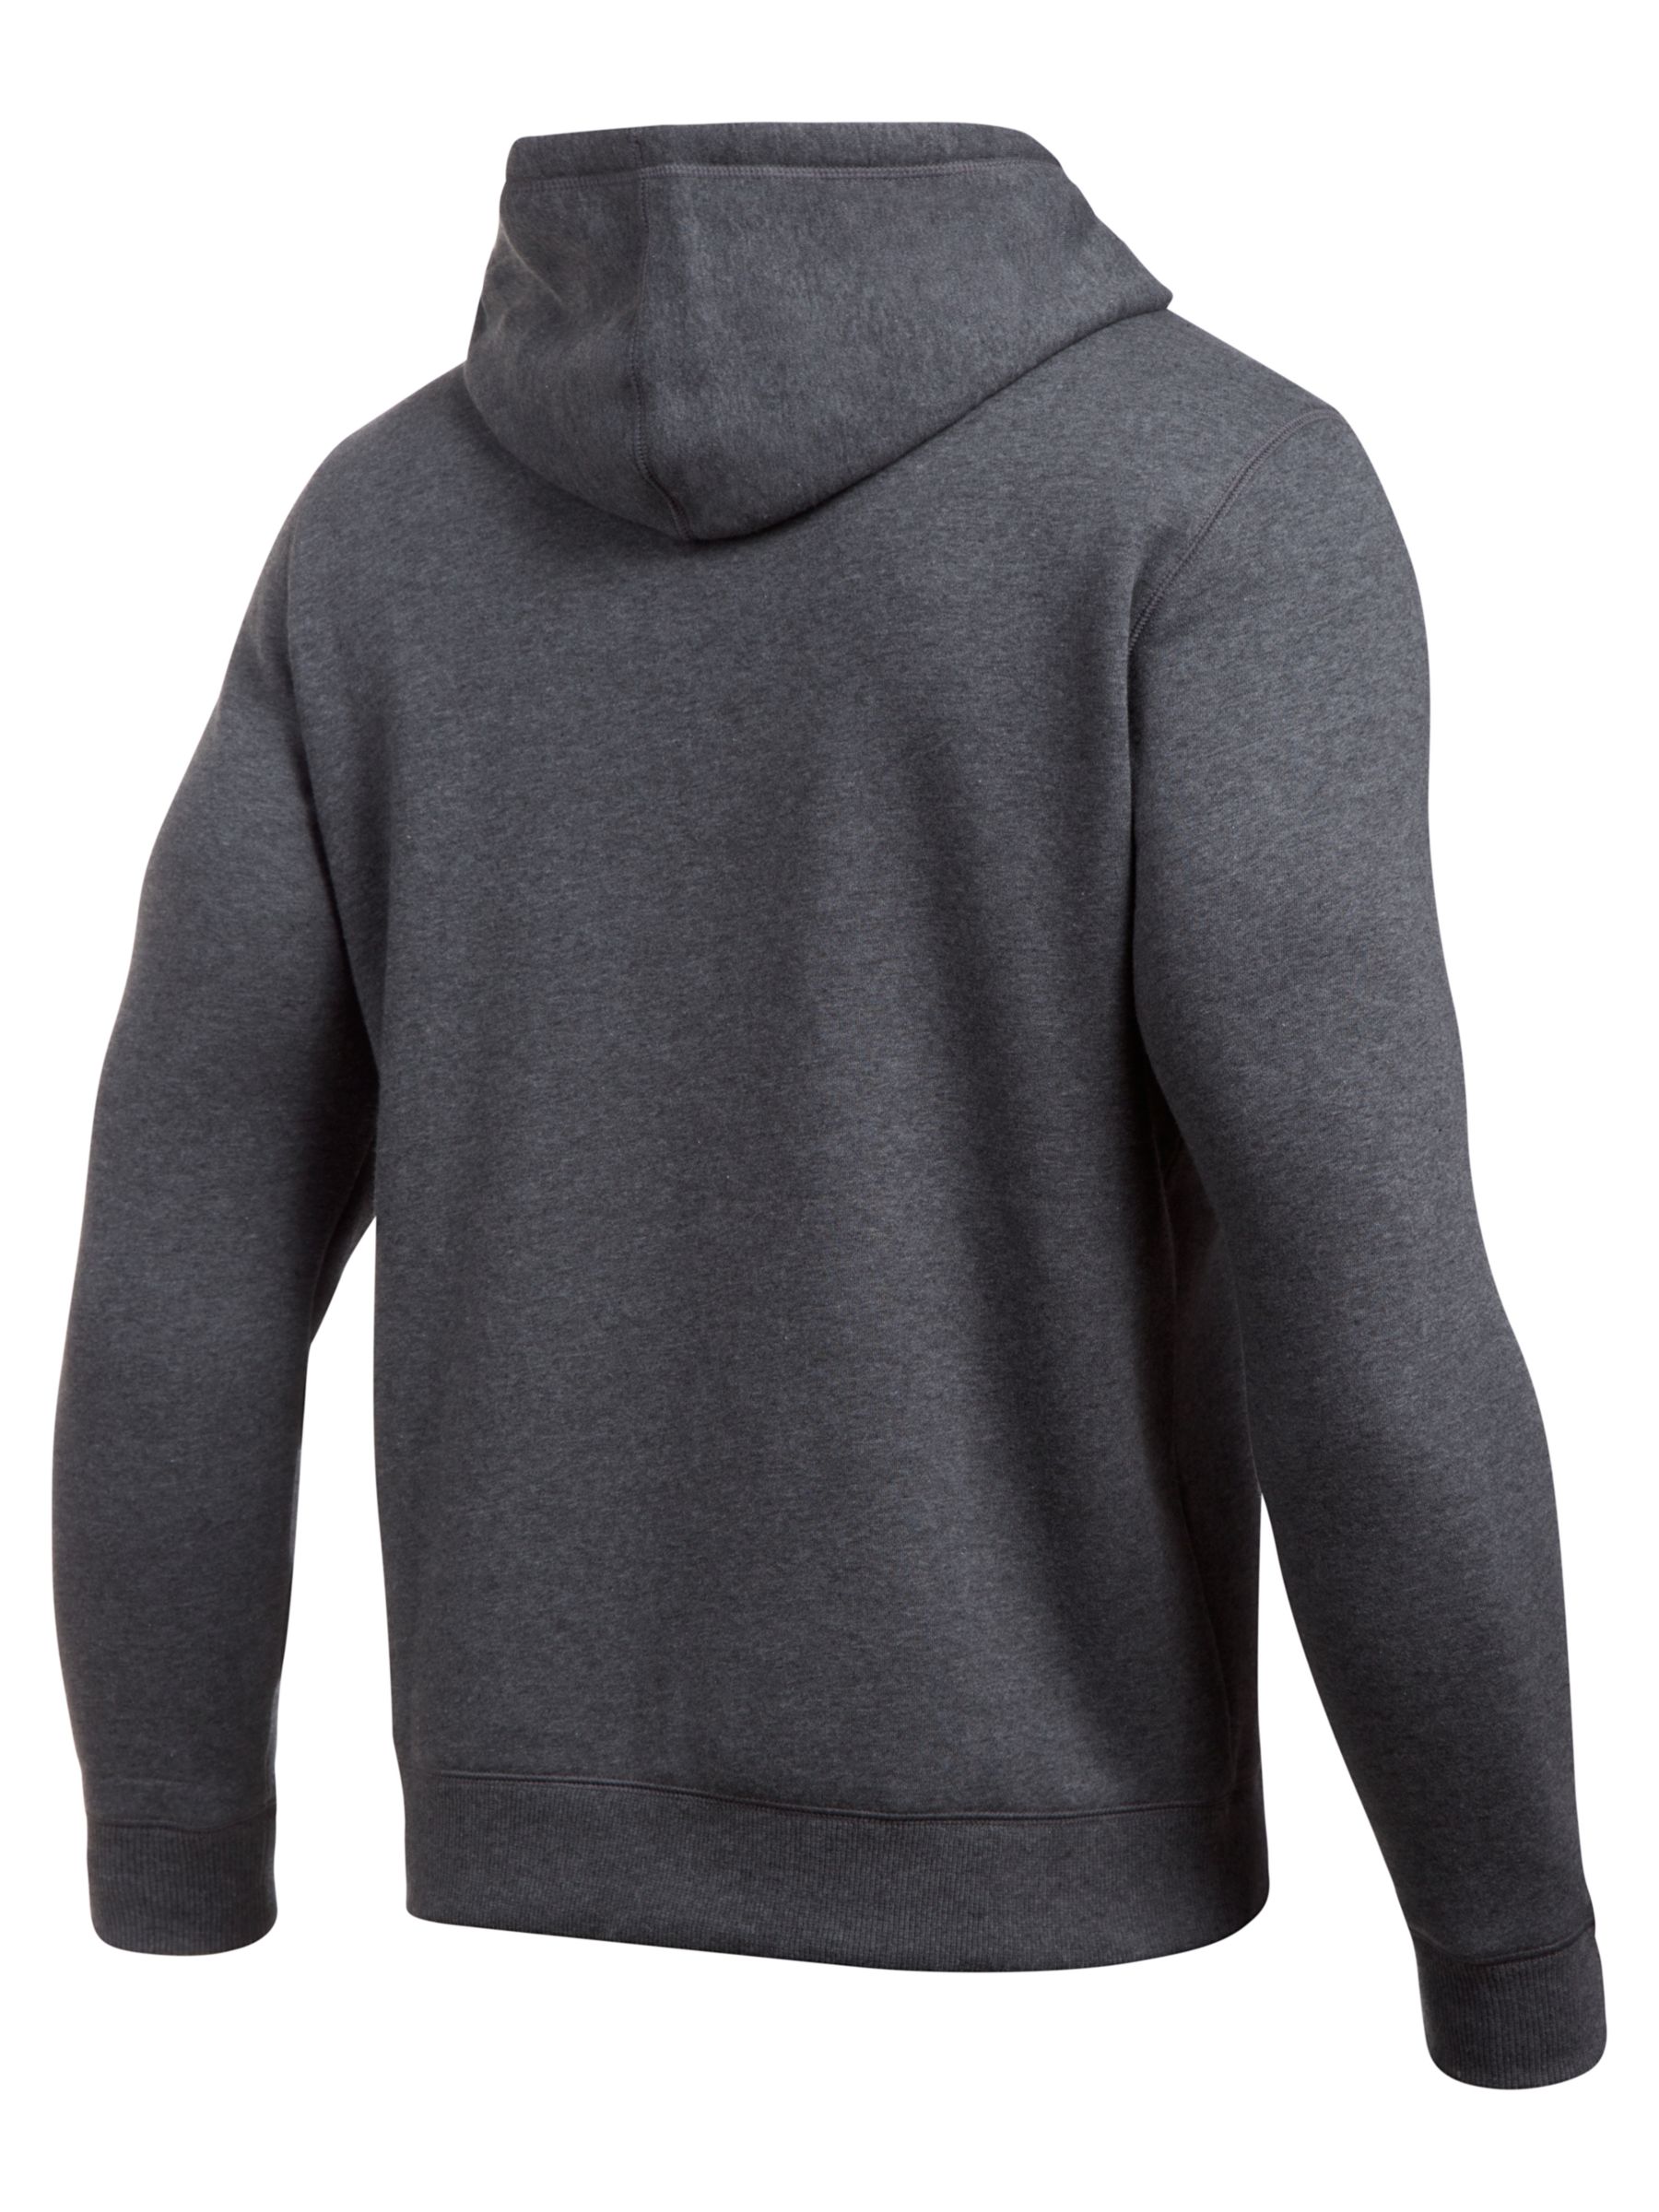 Under Armour Rival Fitted Graphic Hoodie, Grey at John Lewis & Partners